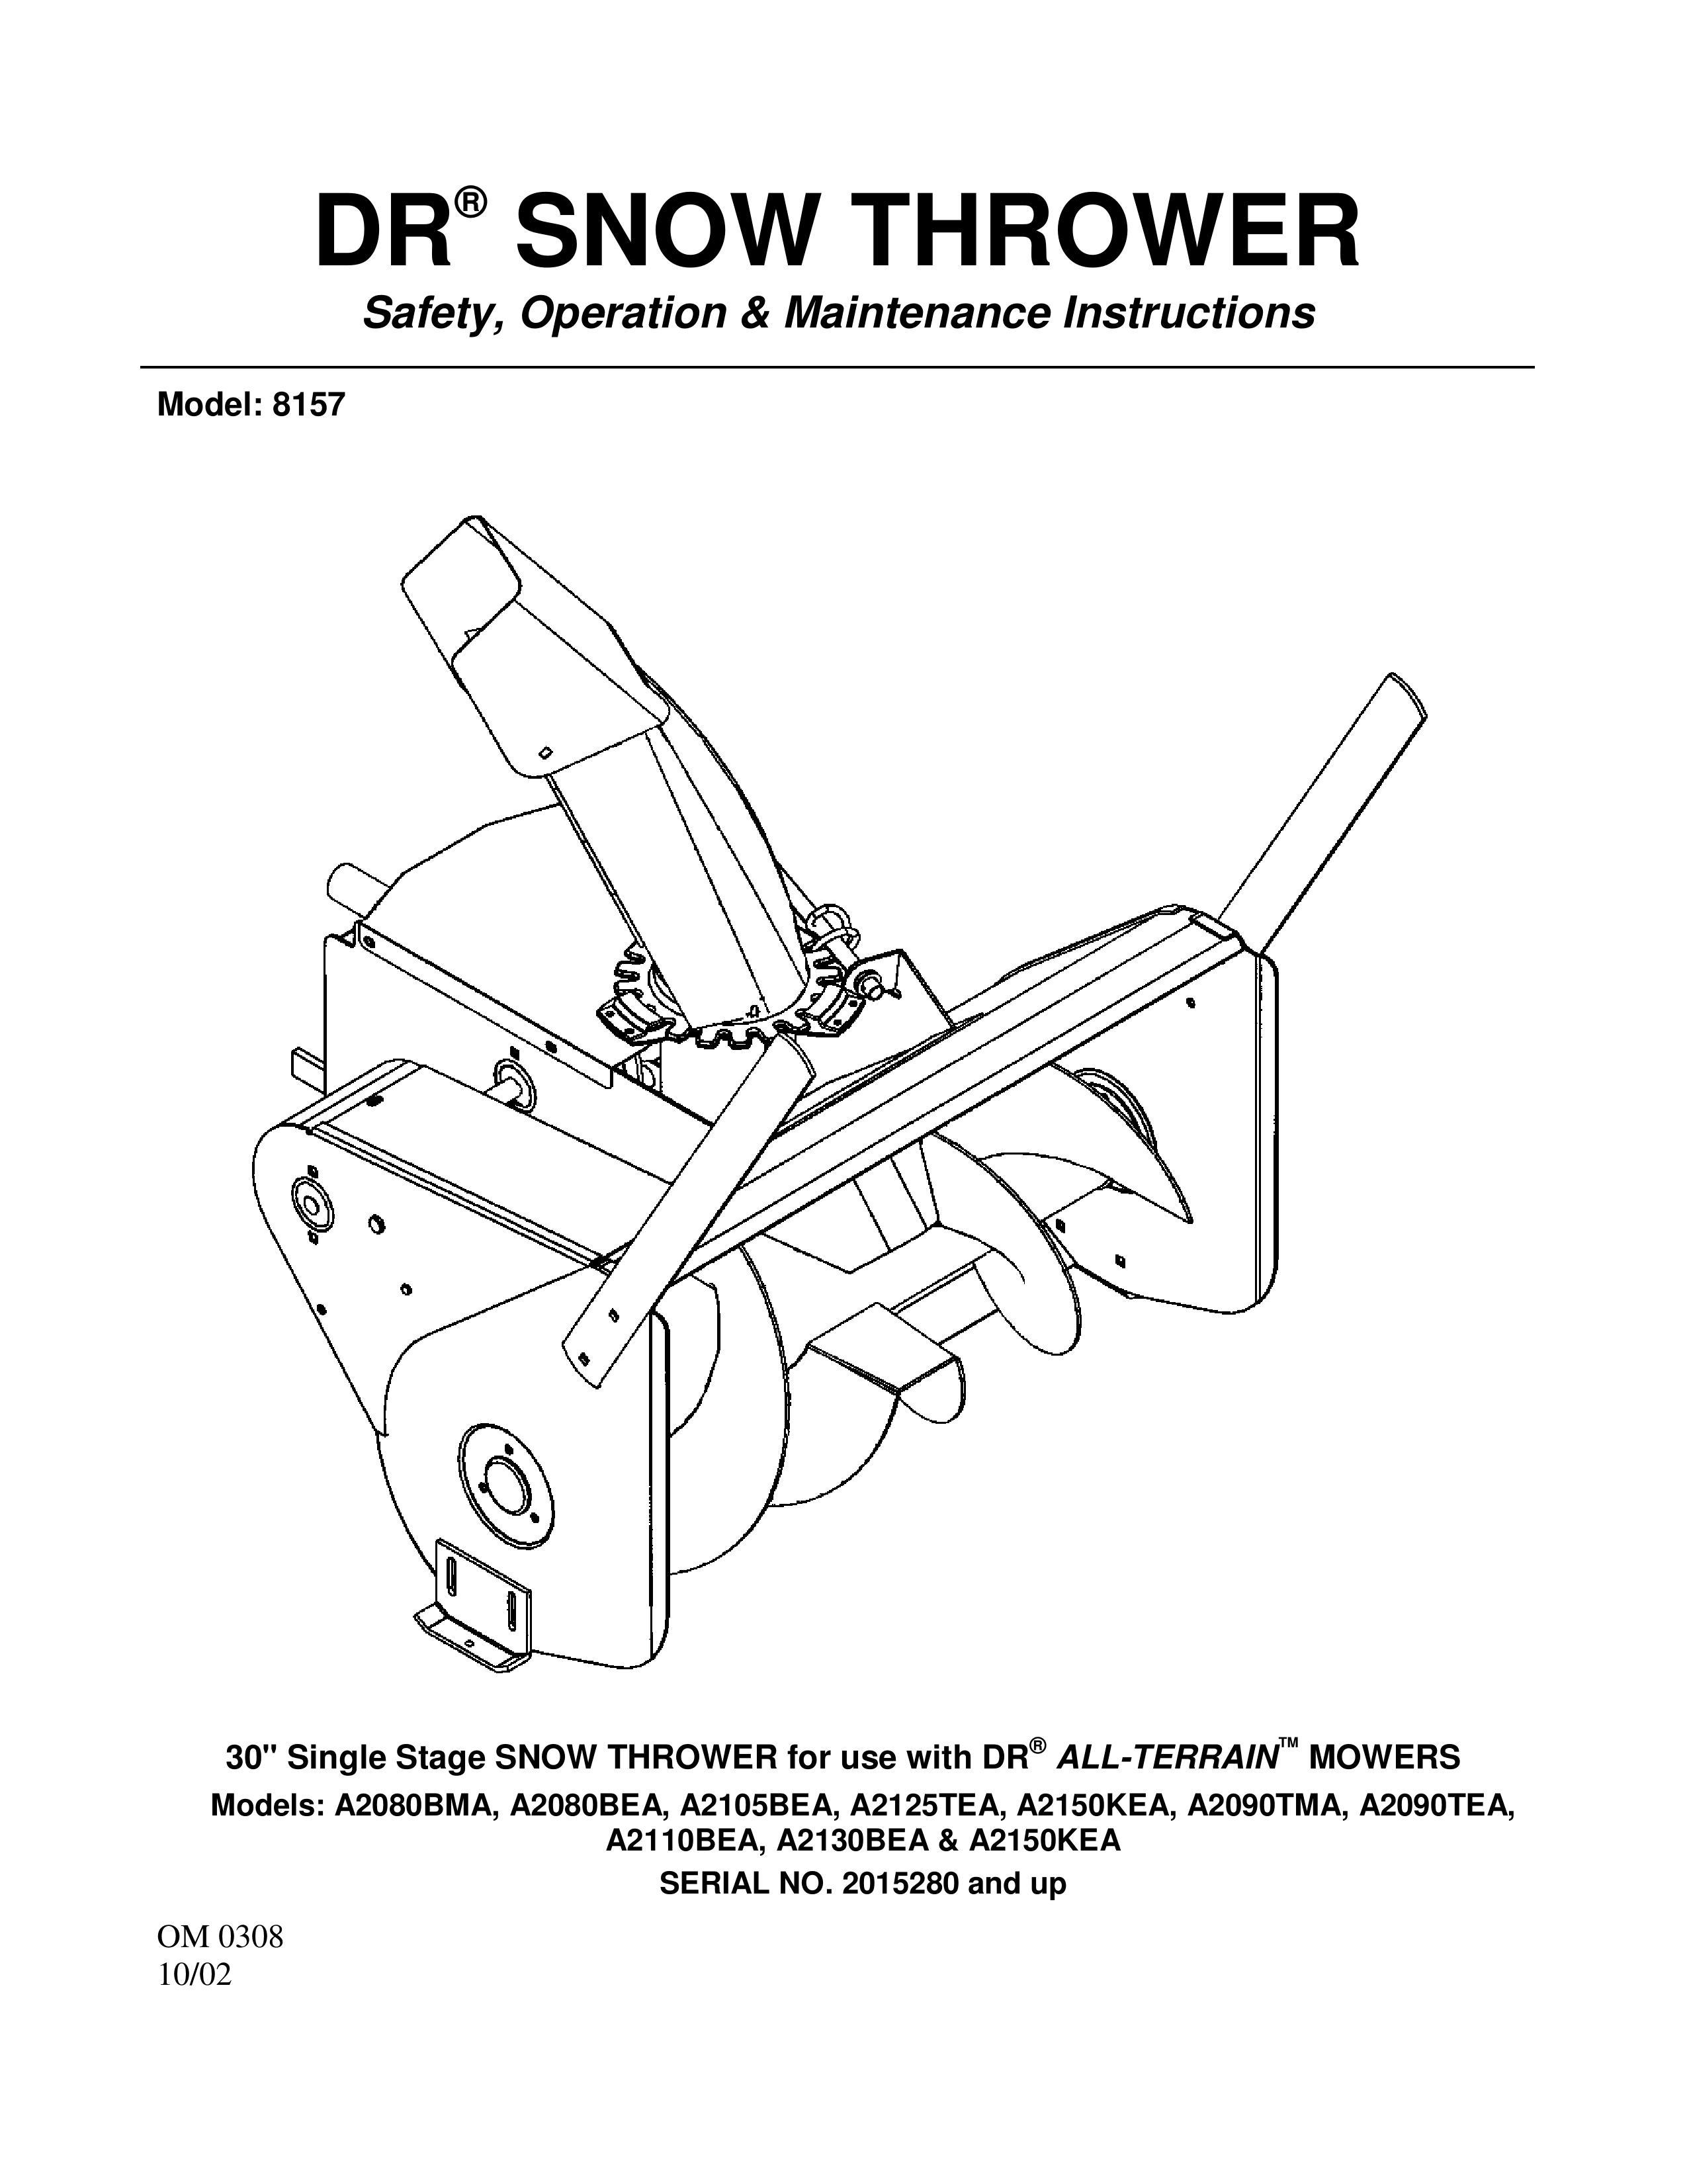 Country Home Products A2105BEA Snow Blower User Manual